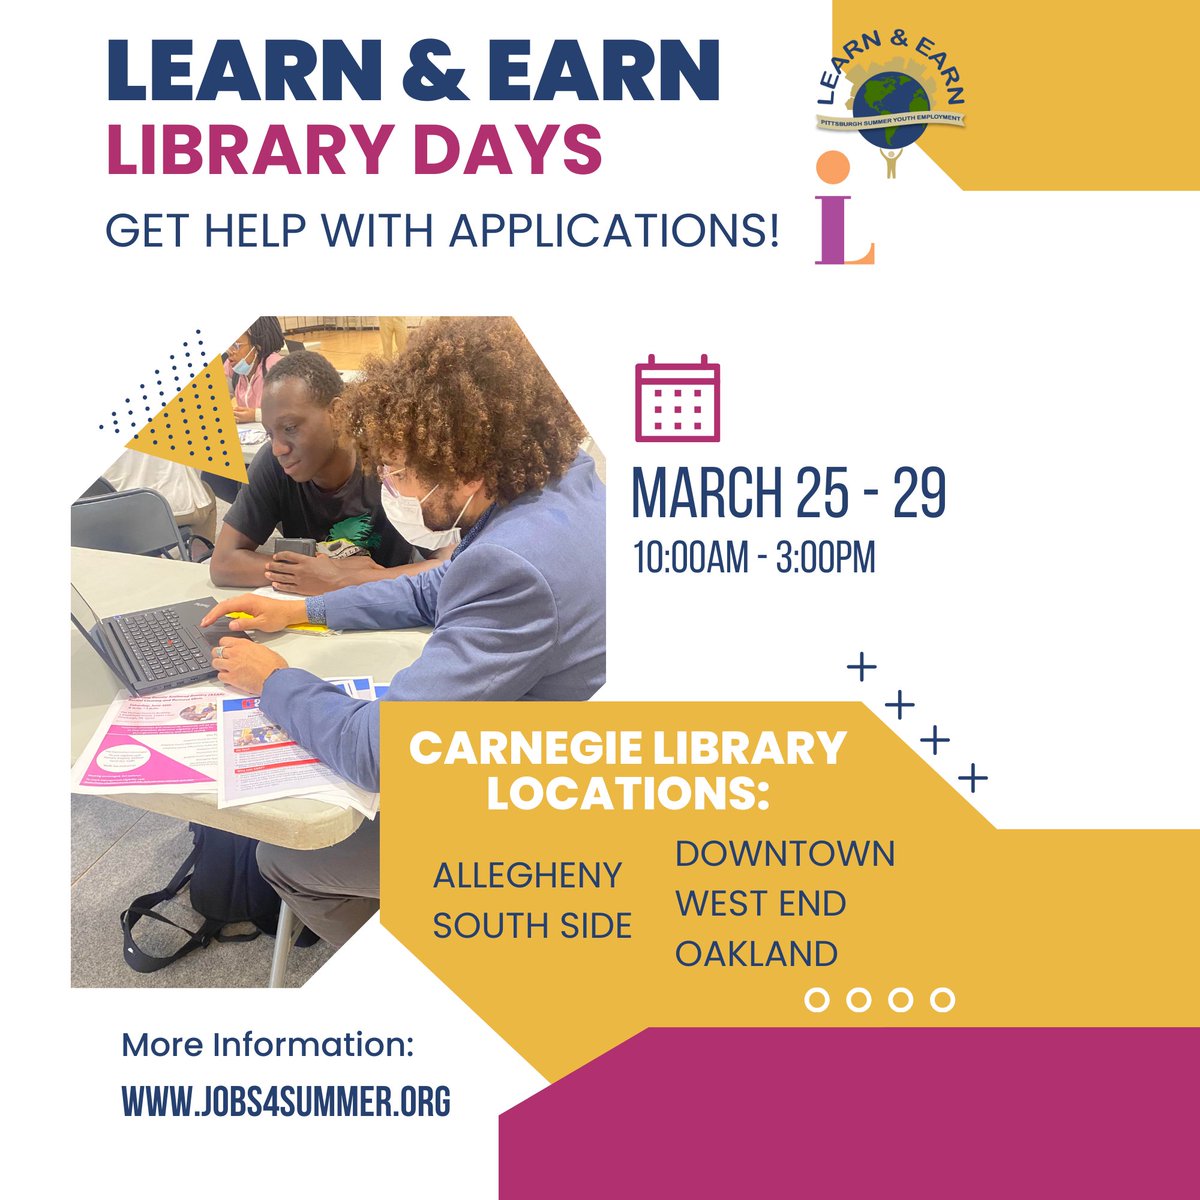 This Week! Join us for Learn & Earn Library Days to get assistance with your application! Visit the Allegheny, South Side, Downtown, West End, or Oakland branch of the @carnegielibrary from 10 am - 3 pm. Visit Jobs4Summer.org to learn more.